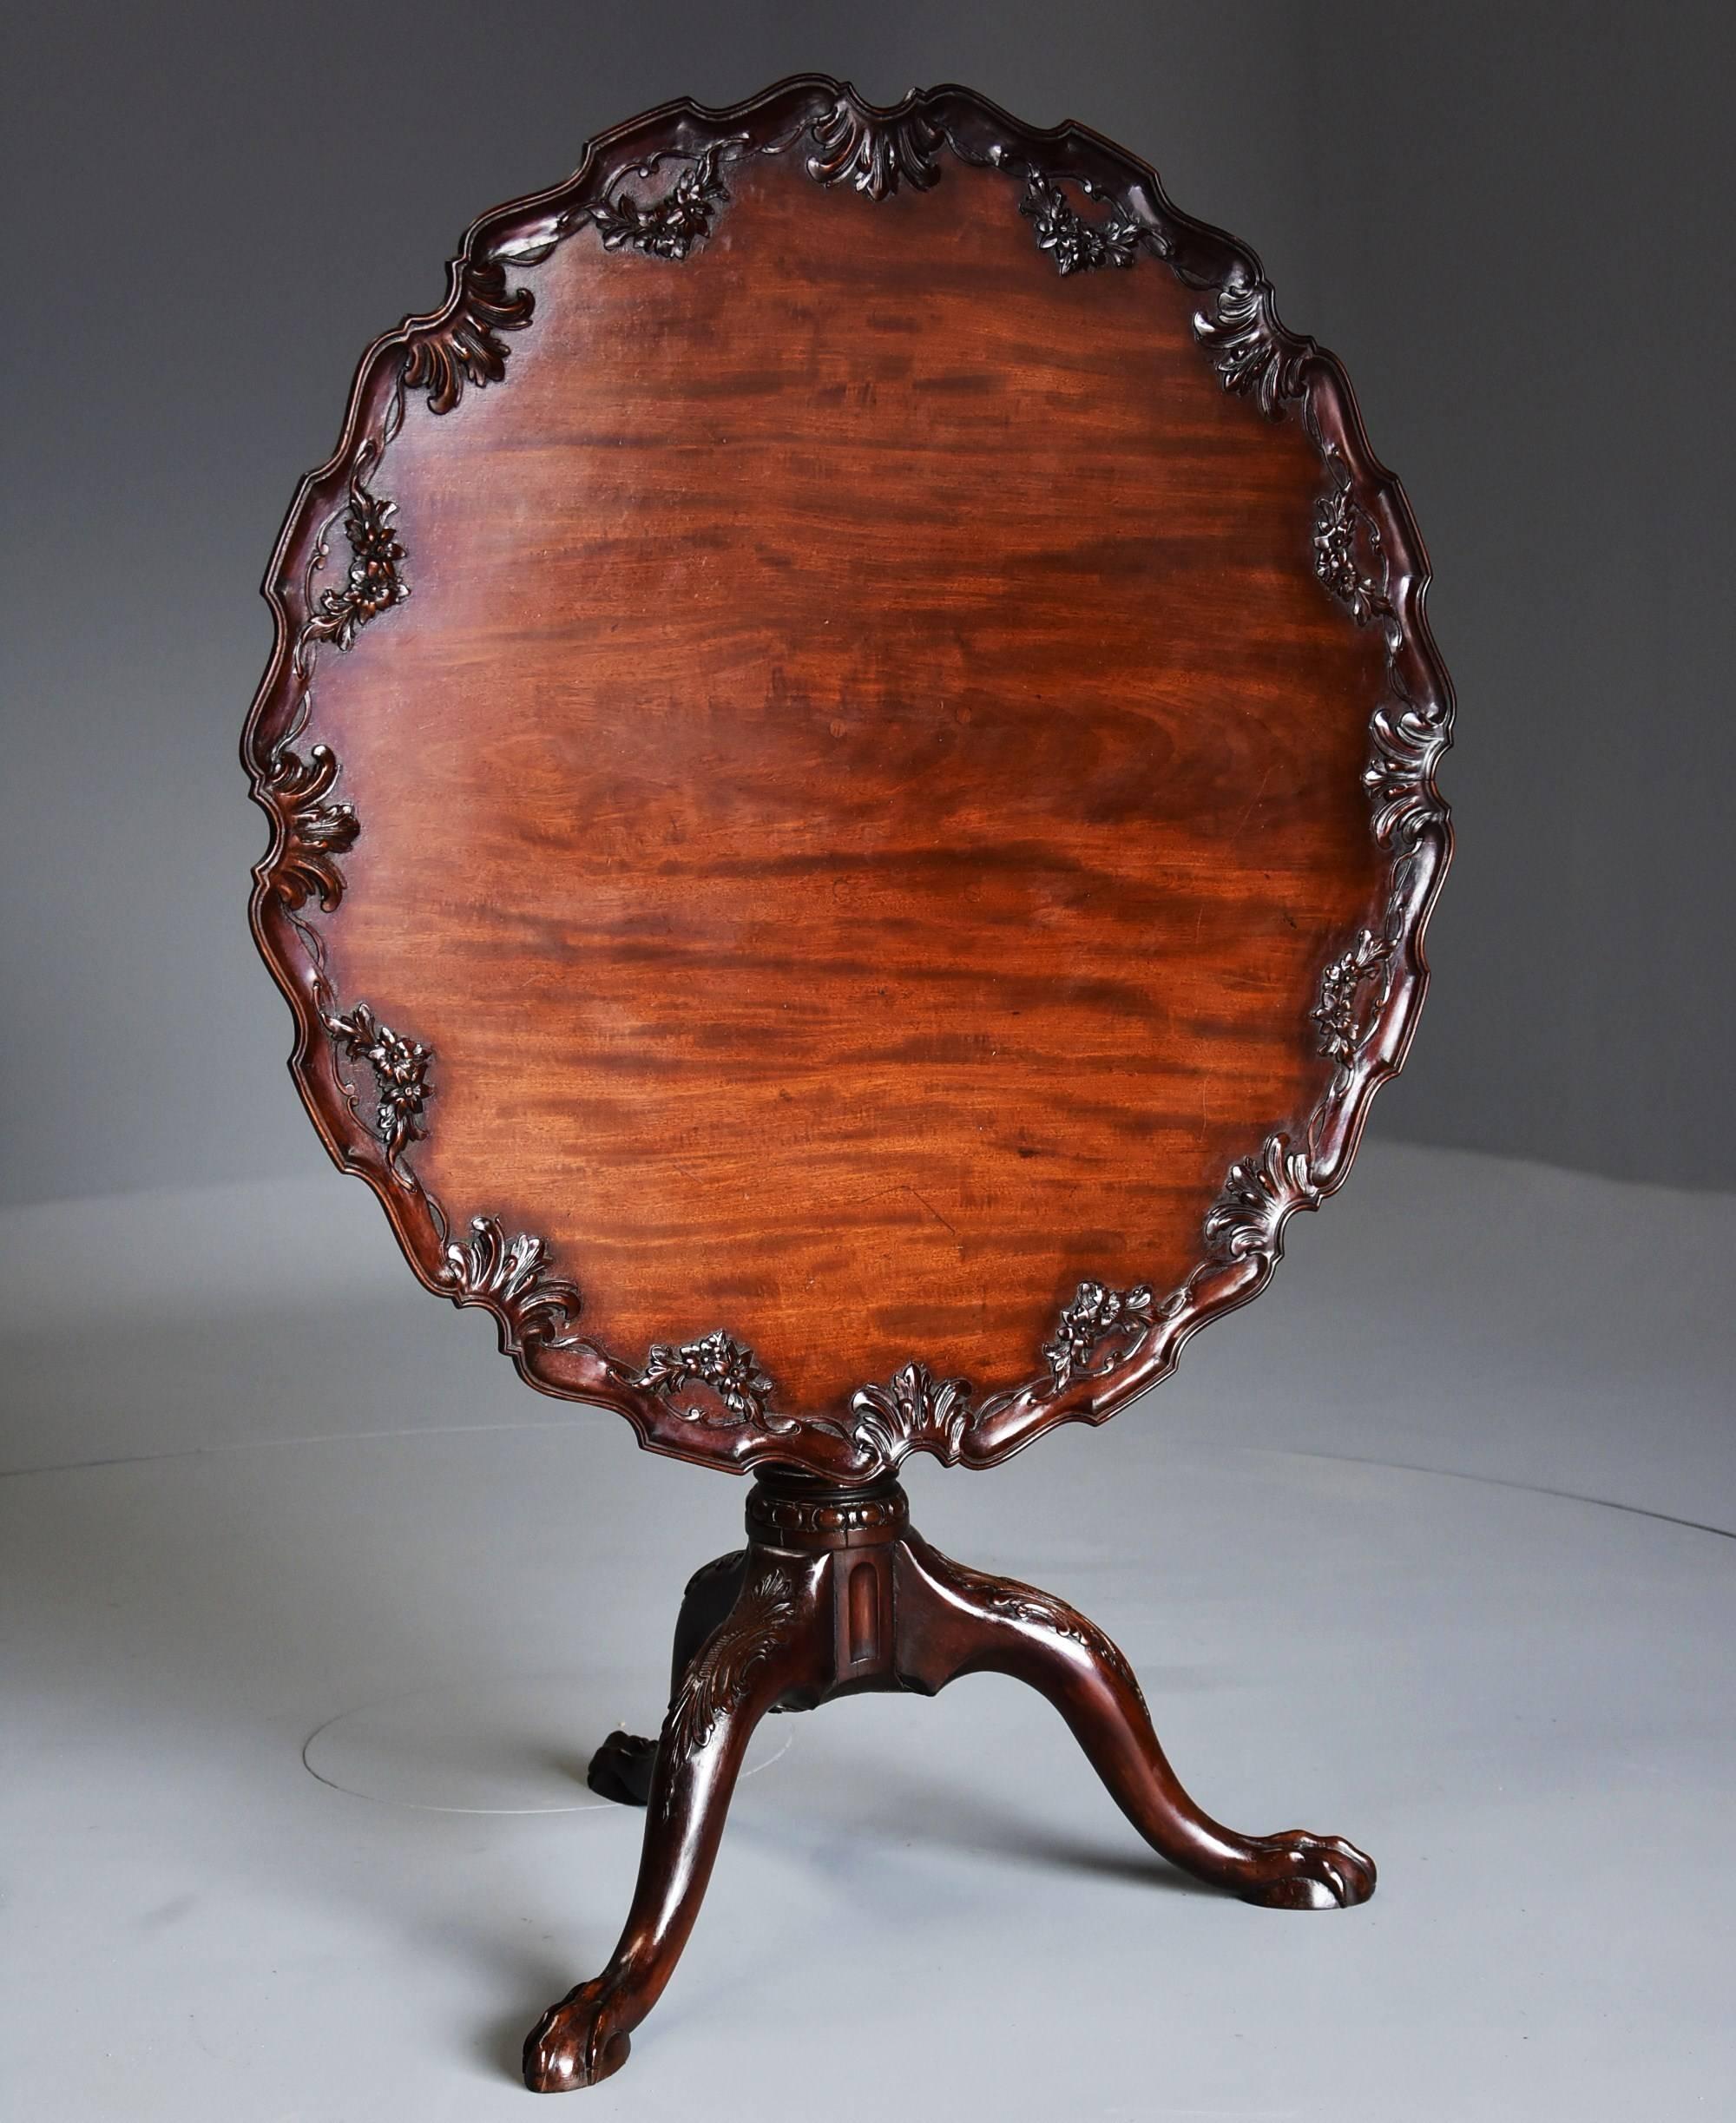 A late 19th century mahogany Chippendale style piecrust tilt-top tea table with tripod base.

This table consists of a mahogany top of superb patina (colour) with applied floral and foliate carved decoration with an applied piecrust decoration to